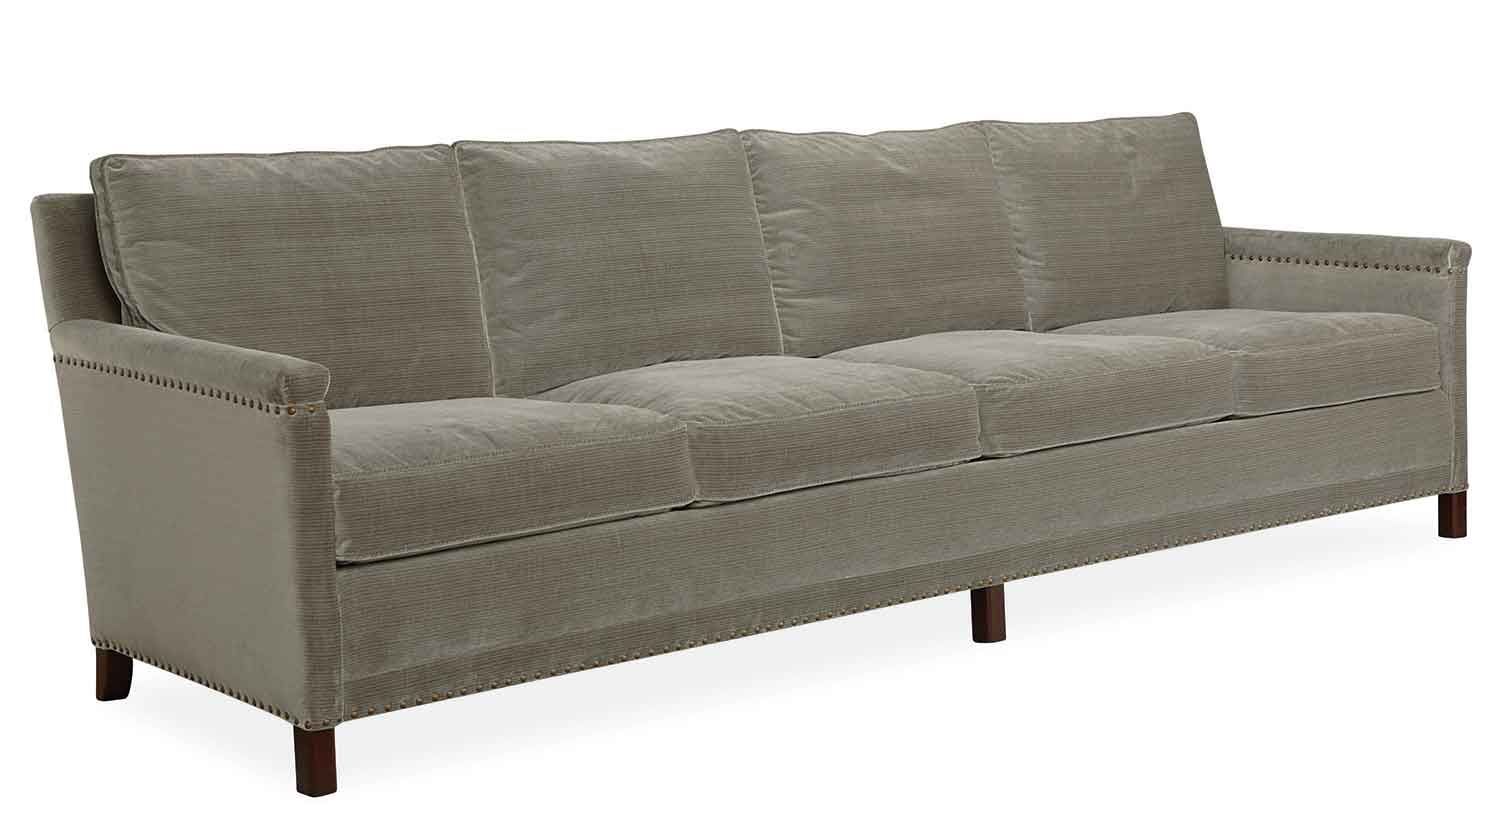 Circle Furniture Paige 4 Seat Sofa Sofas Acton Circle Furniture For 4 Seat Couch (View 5 of 15)